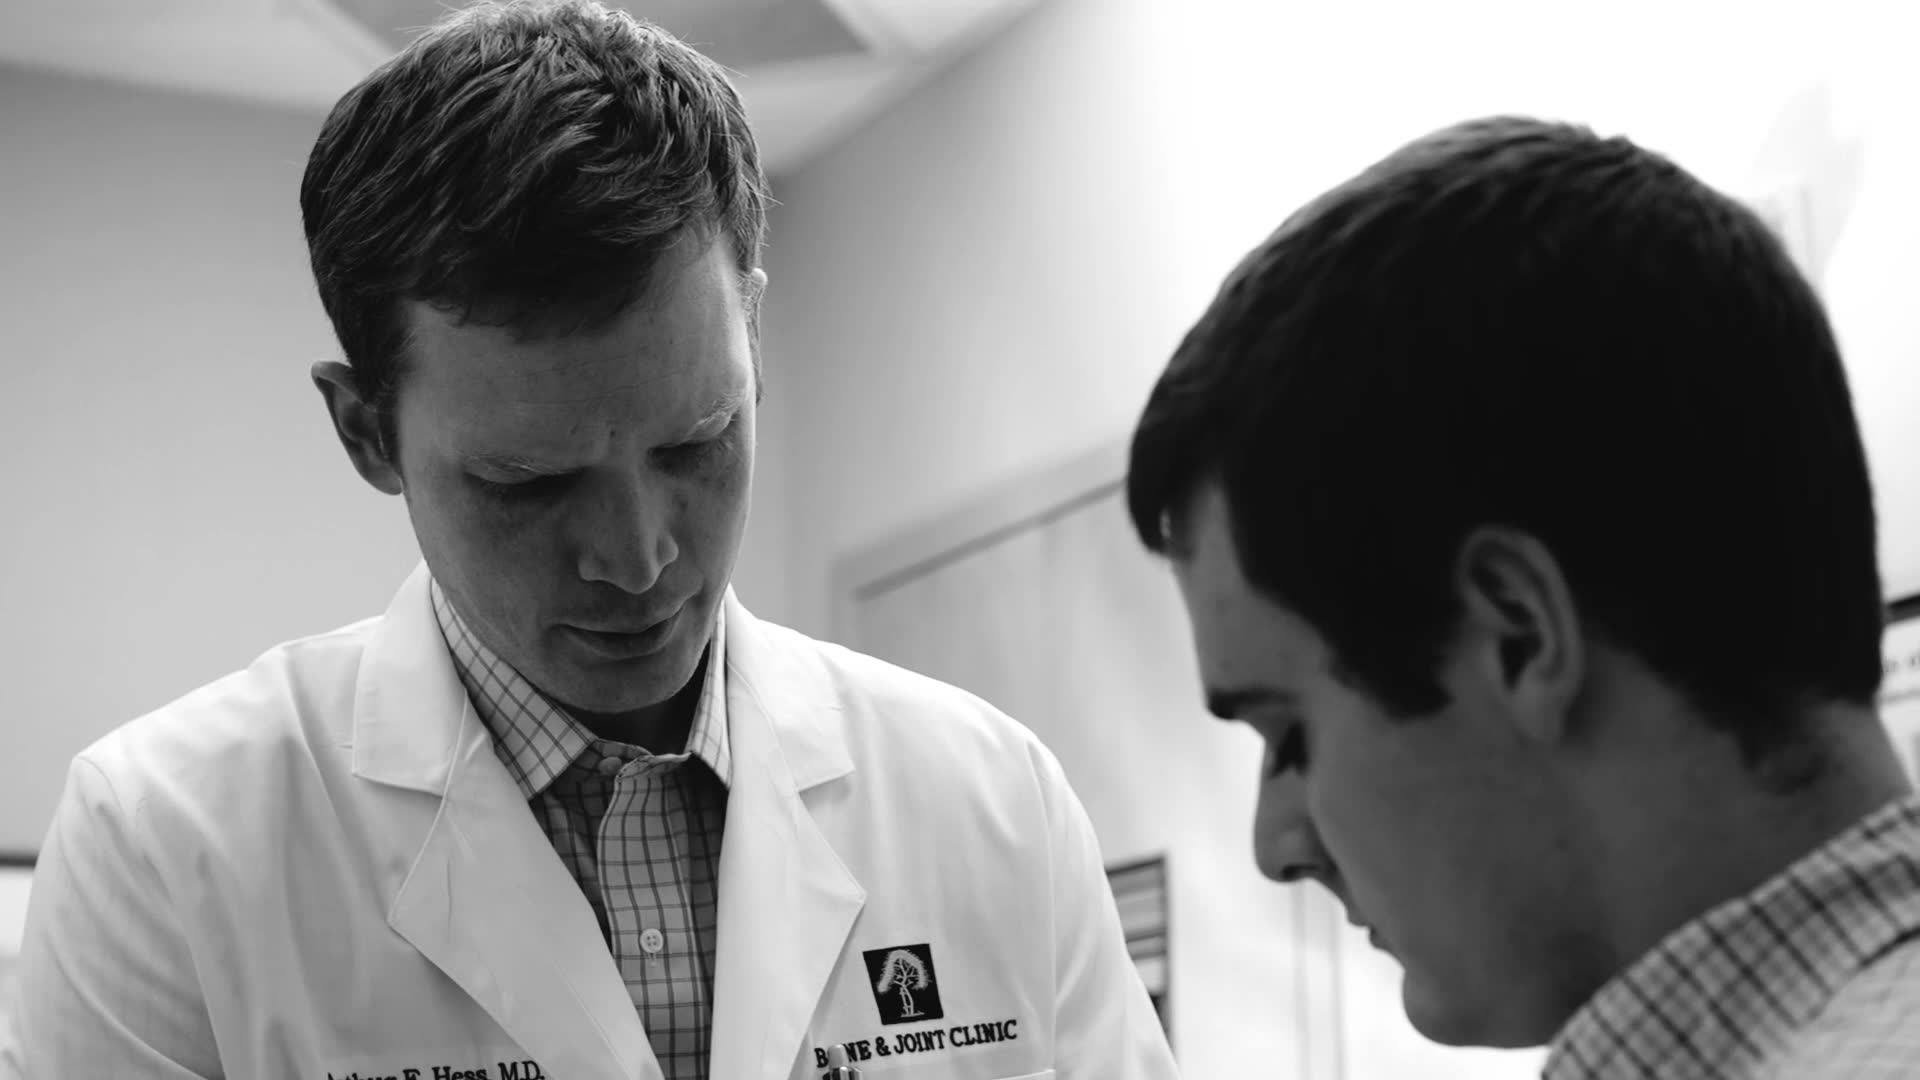 A Baton Rouge Orthopedic Surgeon Focused on Positive Patient Outcomes